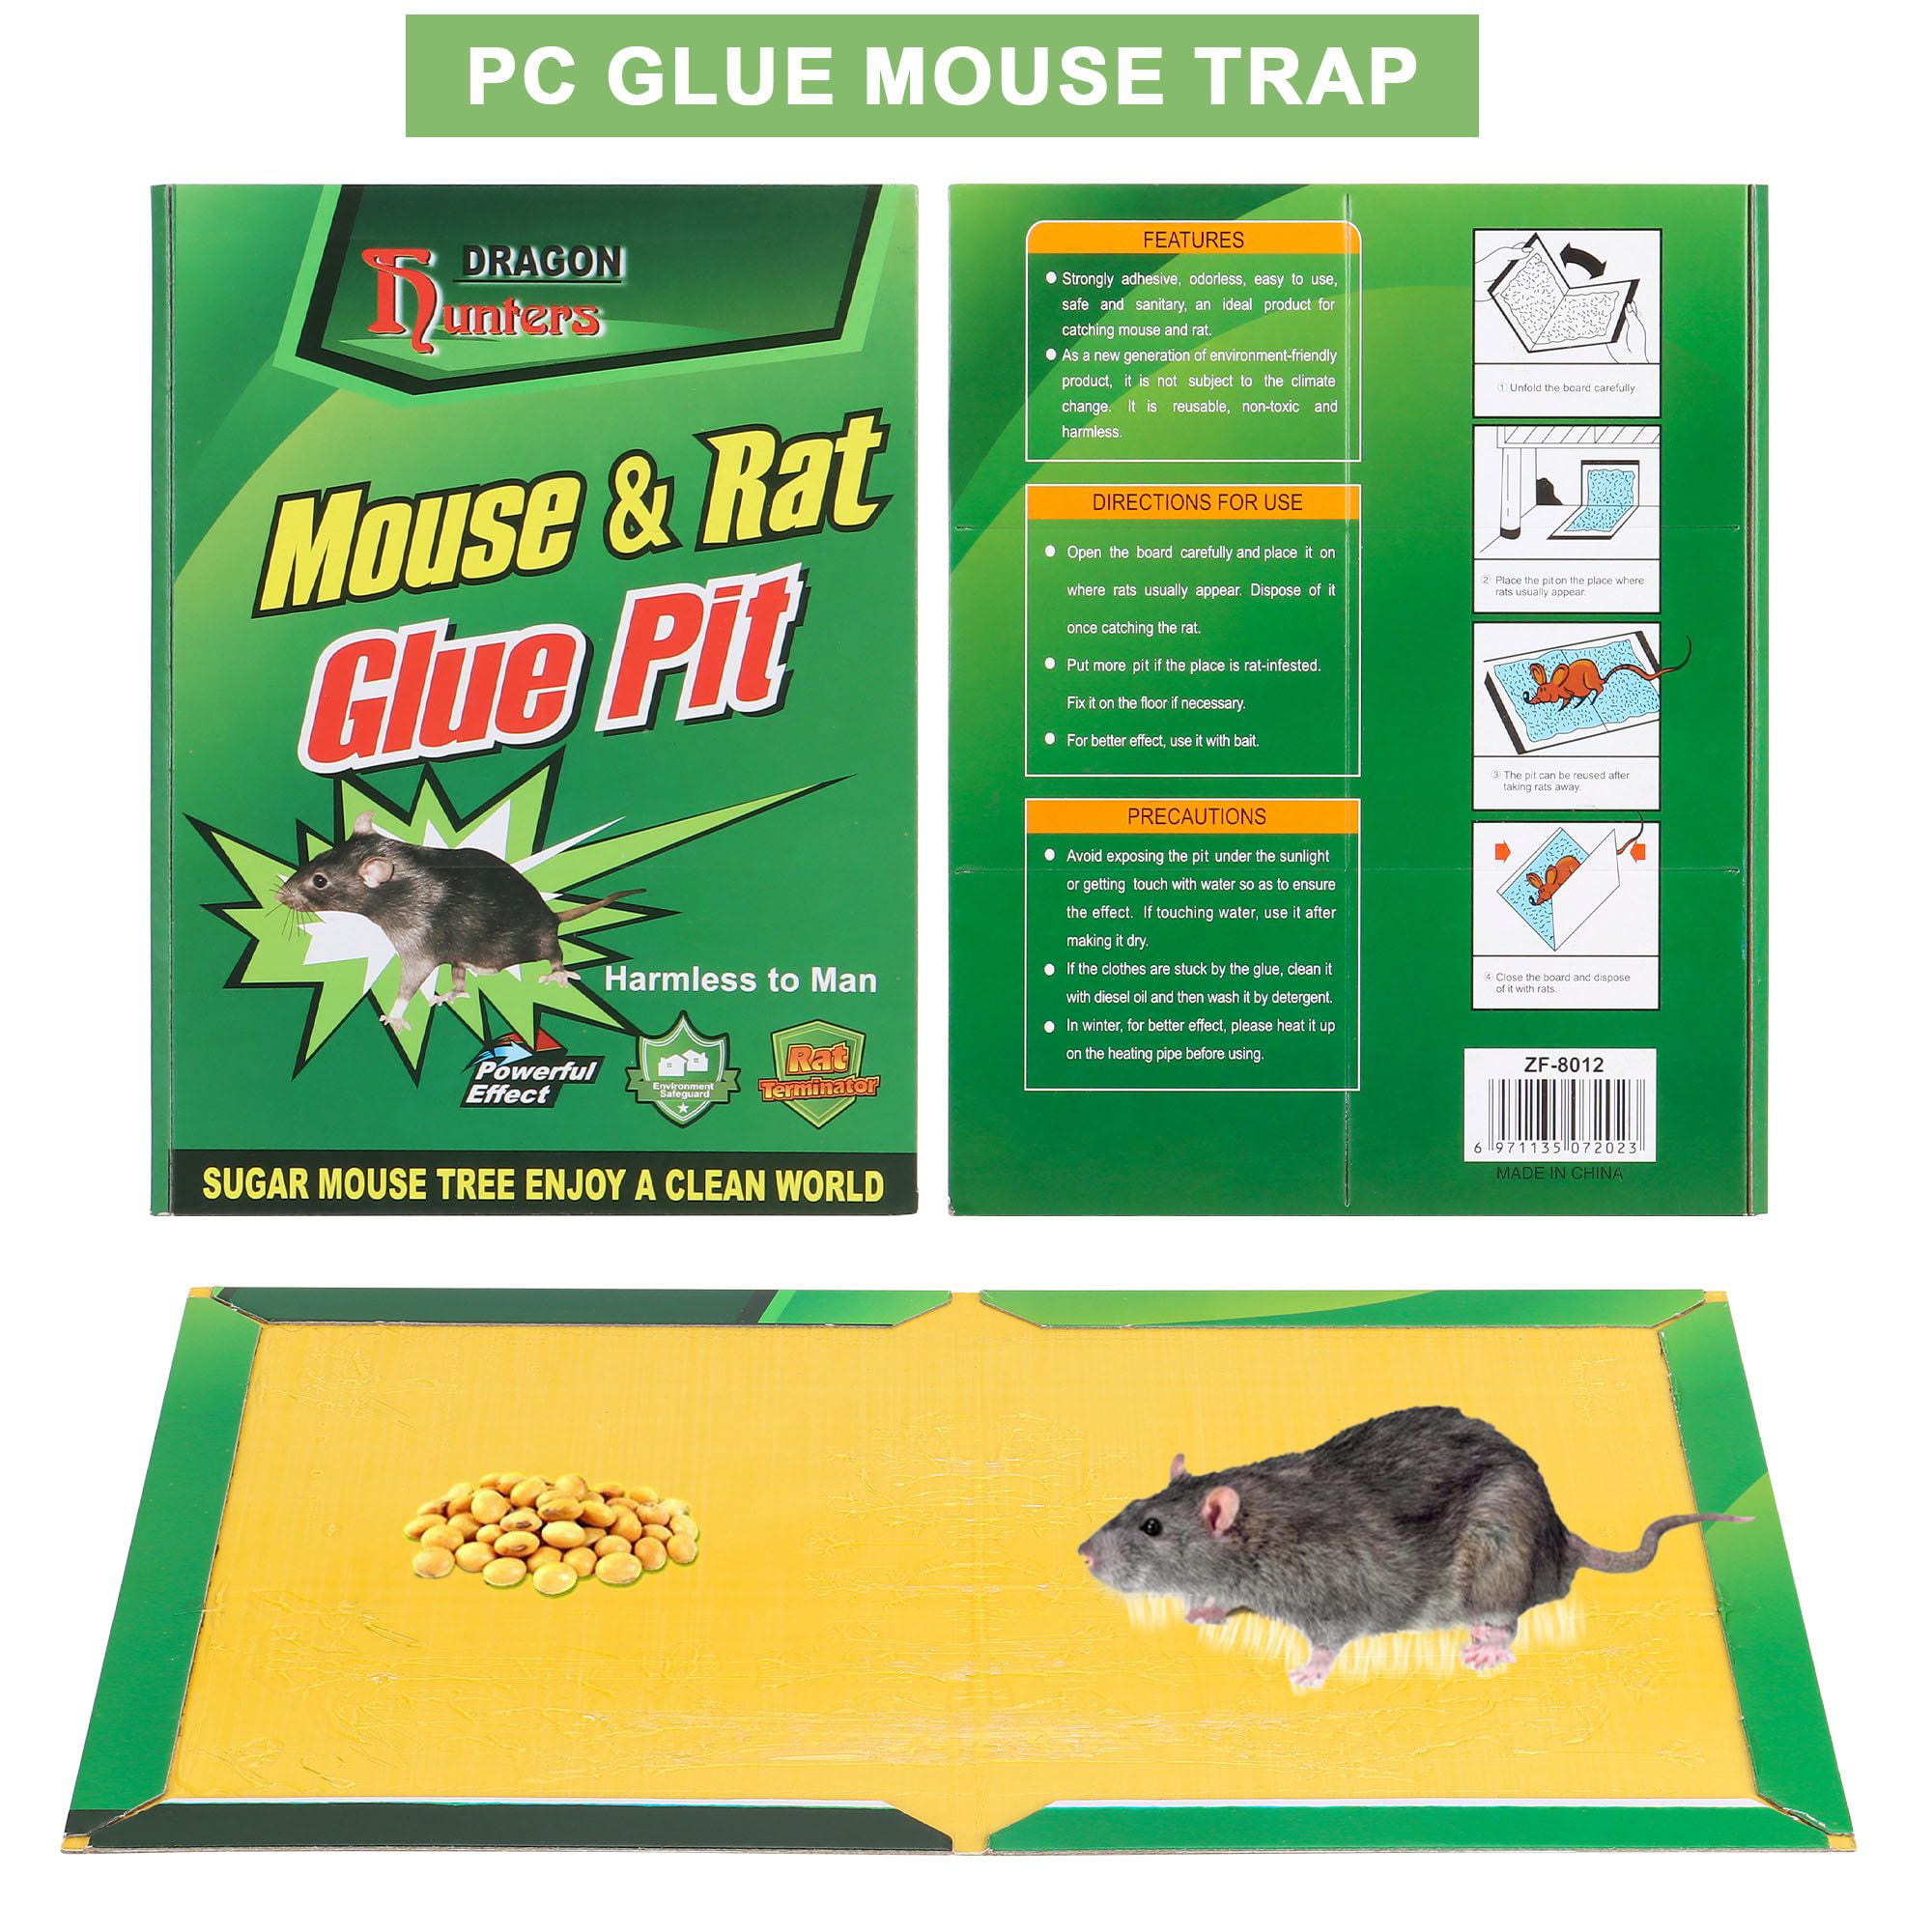  Sticky Mouse Trap Mouse Glue Traps Indoor Home Rat Traps  Enhanced Stickiness Trapping Pads Snakes Spiders Roaches for Mice and Rats Traps  Indoor for Home, Rodent Snakes Spiders Roaches (12Packs) 